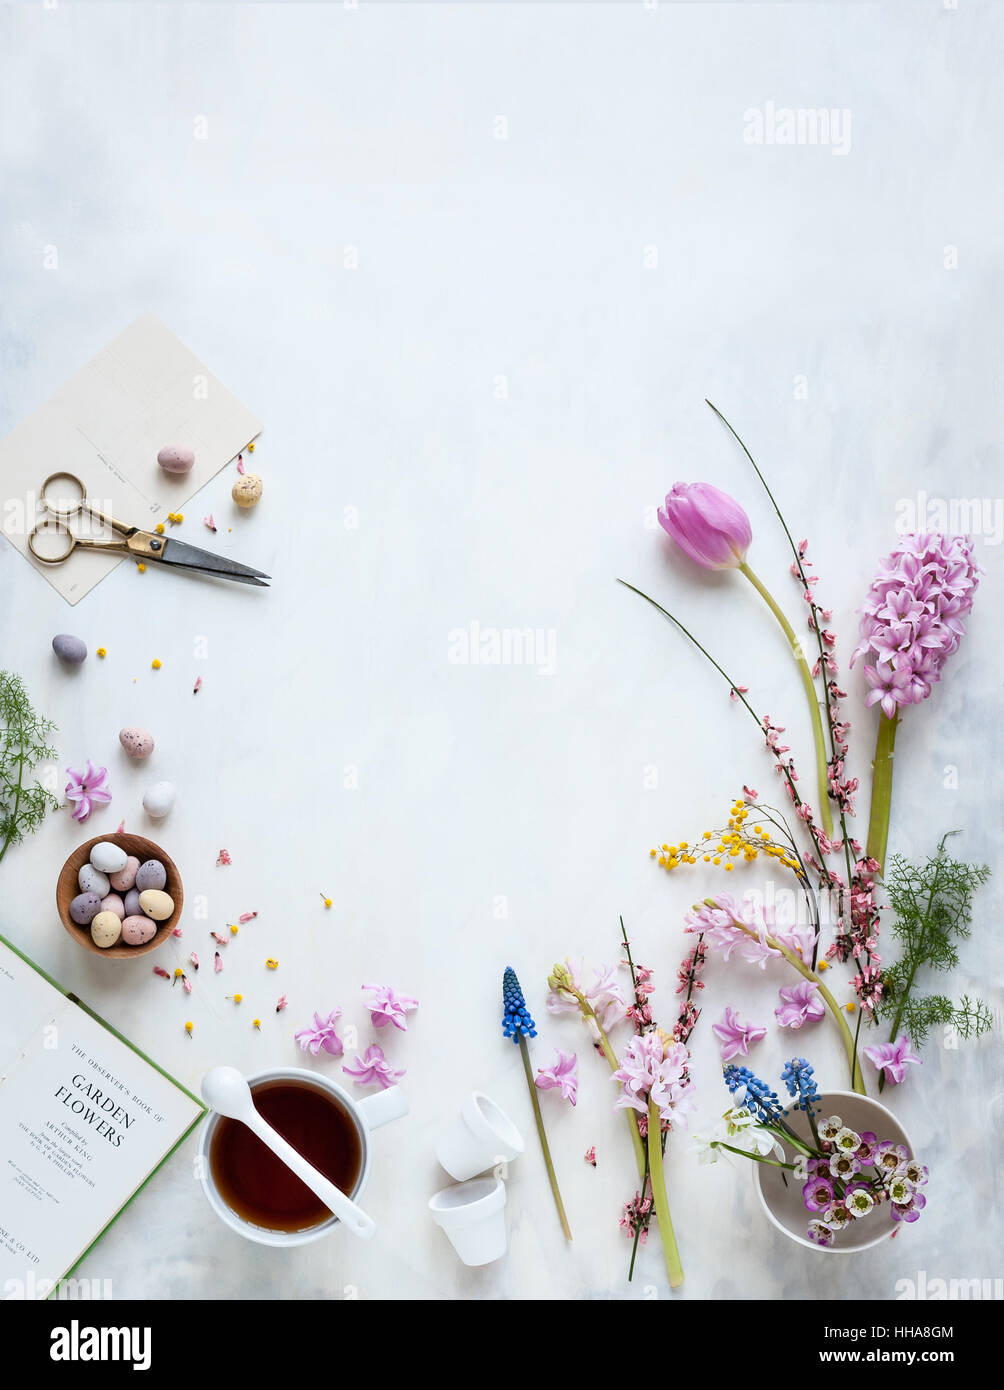 Flat lay still life with teacup, scissors, garden book, fresh spring flowers Stock Photo